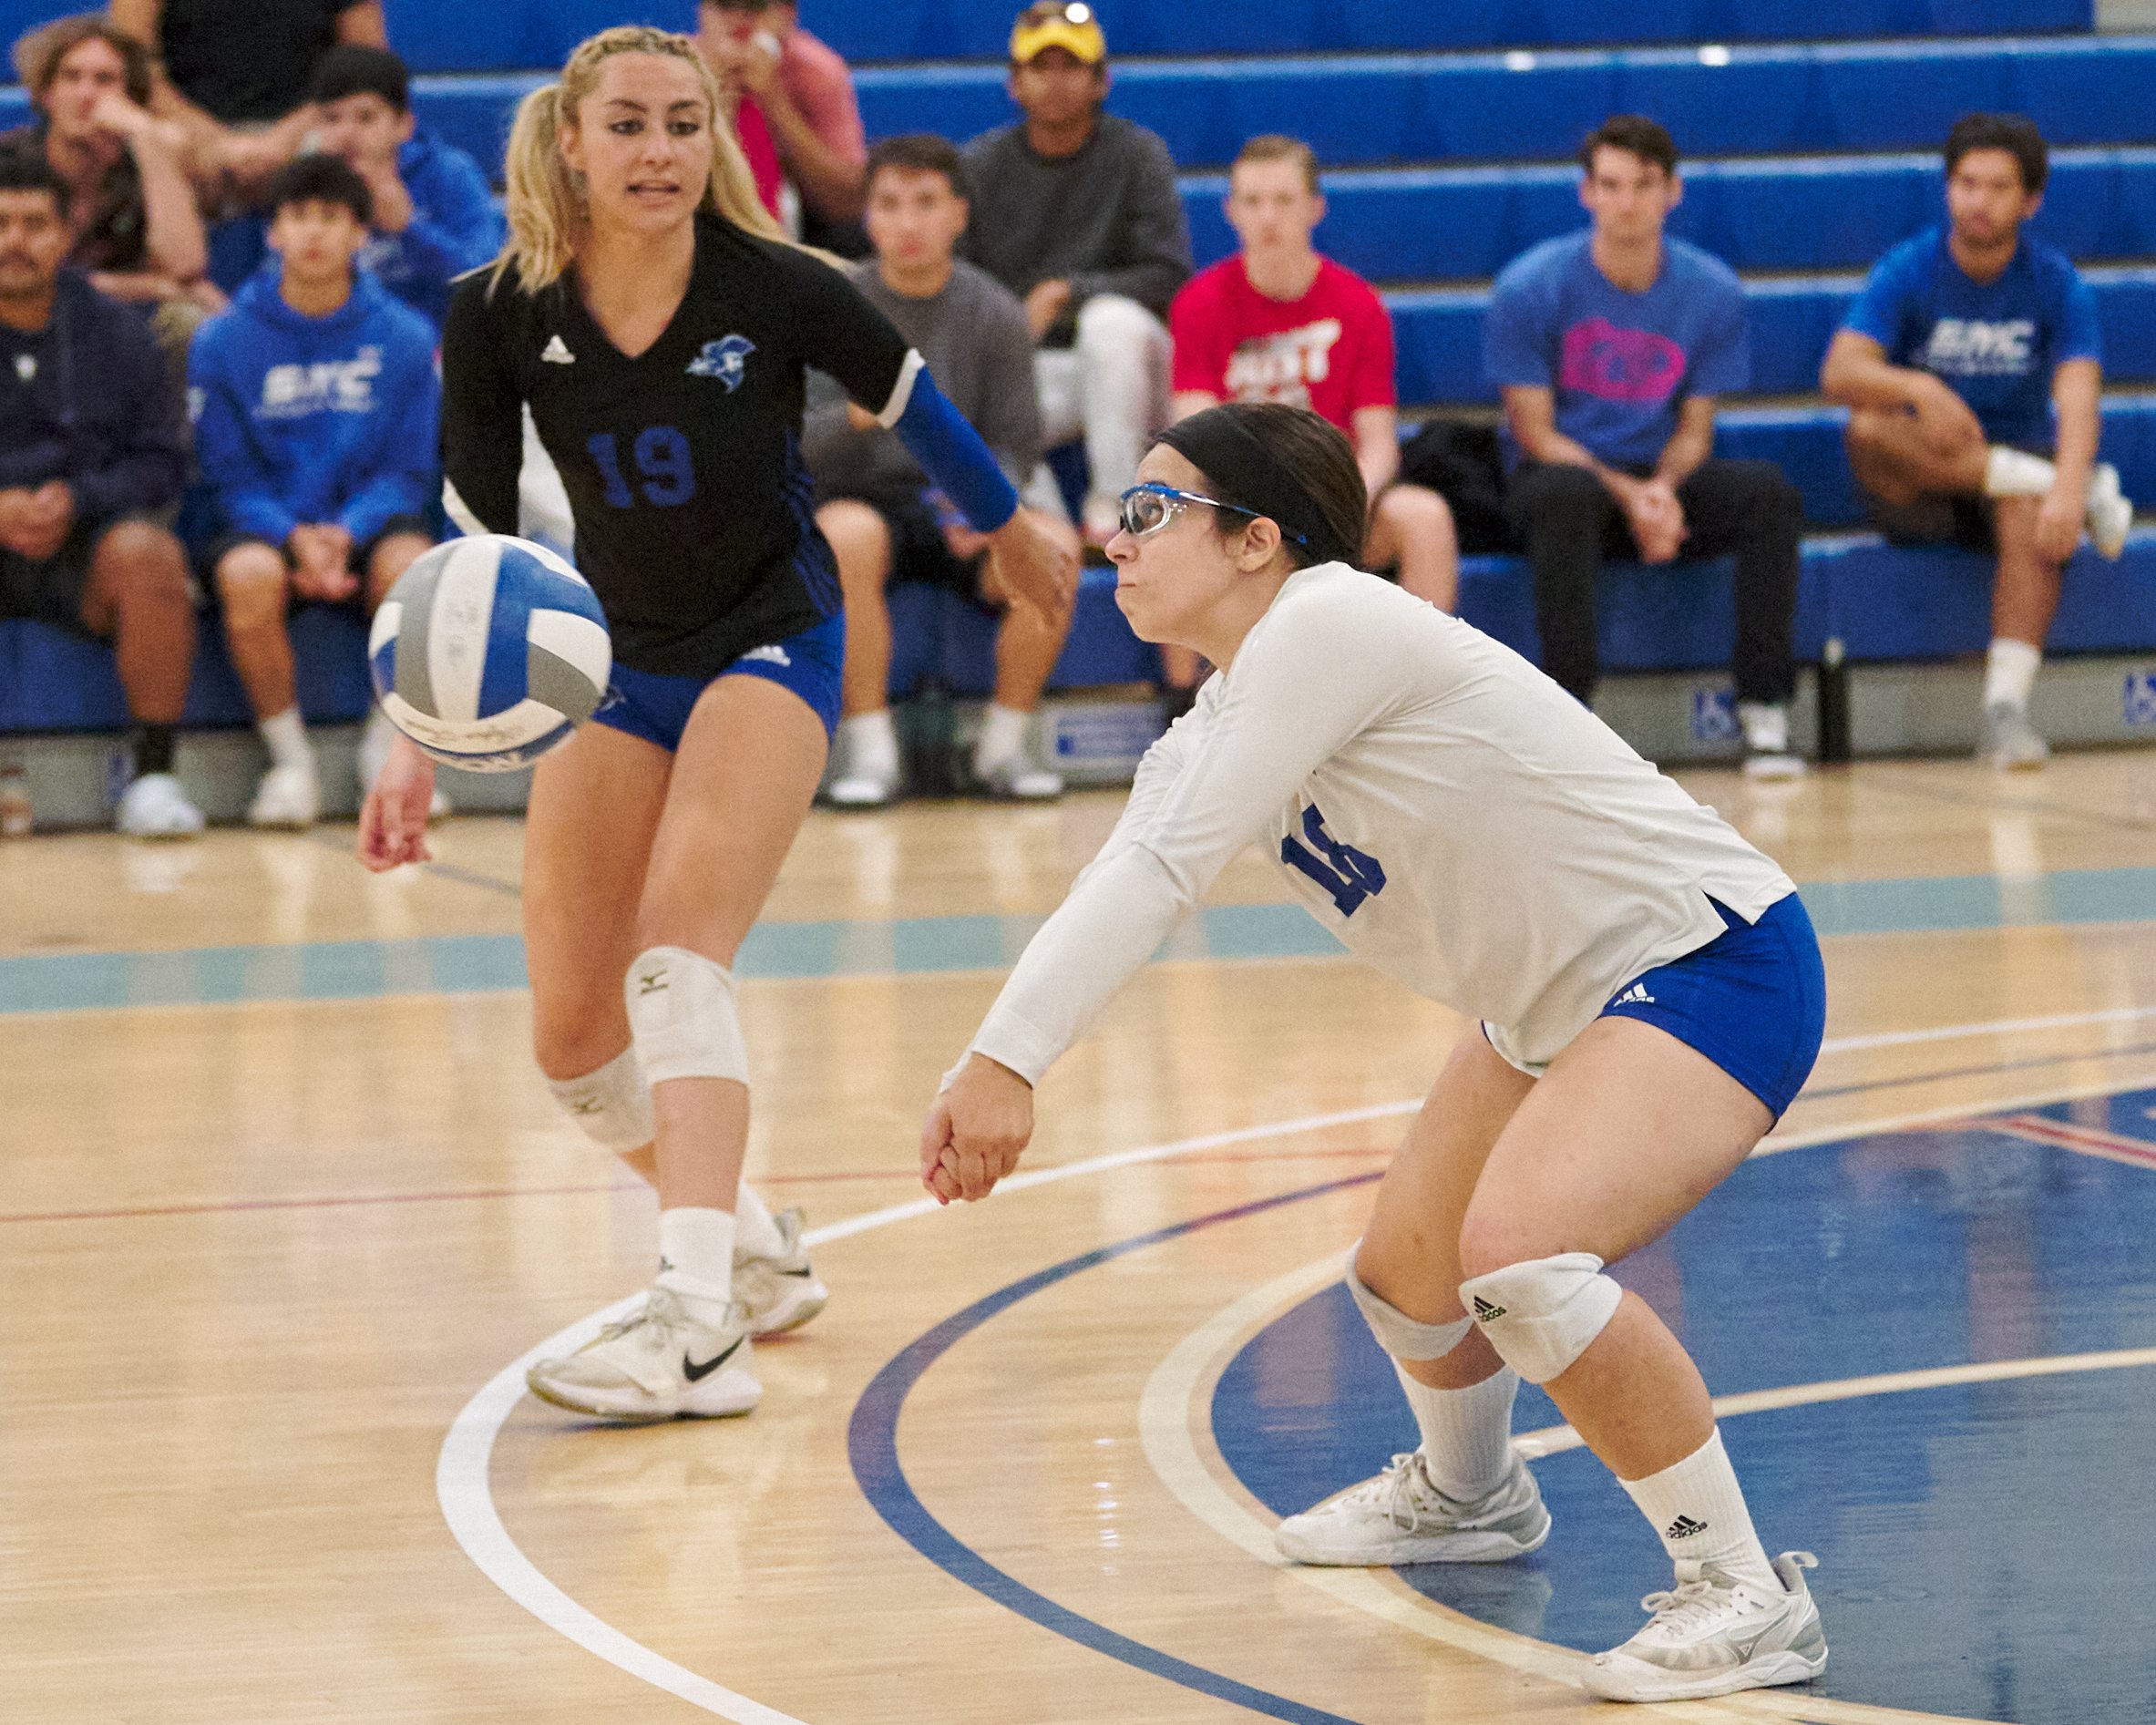  Santa Monica College Corsairs' Scheala Nielsen and Rachel Lallemand during the women's volleyball match against the Antelope Valley College Marauders on Wednesday, Oct. 12, 2022, at the Corsair Gym in Santa Monica, Calif. The Corsairs won 3-1. (Nich